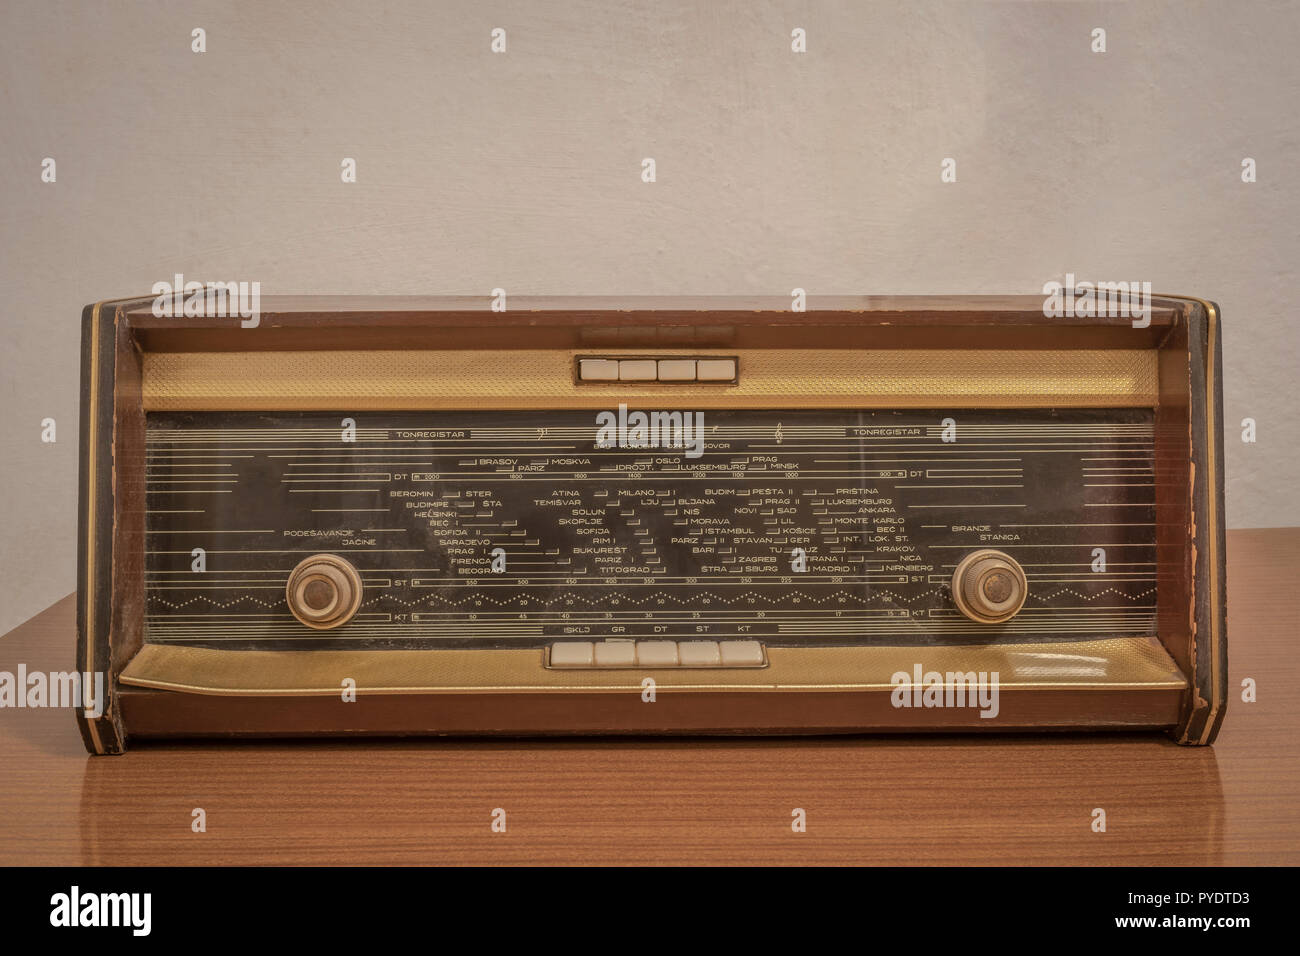 Retro Radio Shows High Resolution Stock Photography and Images - Alamy